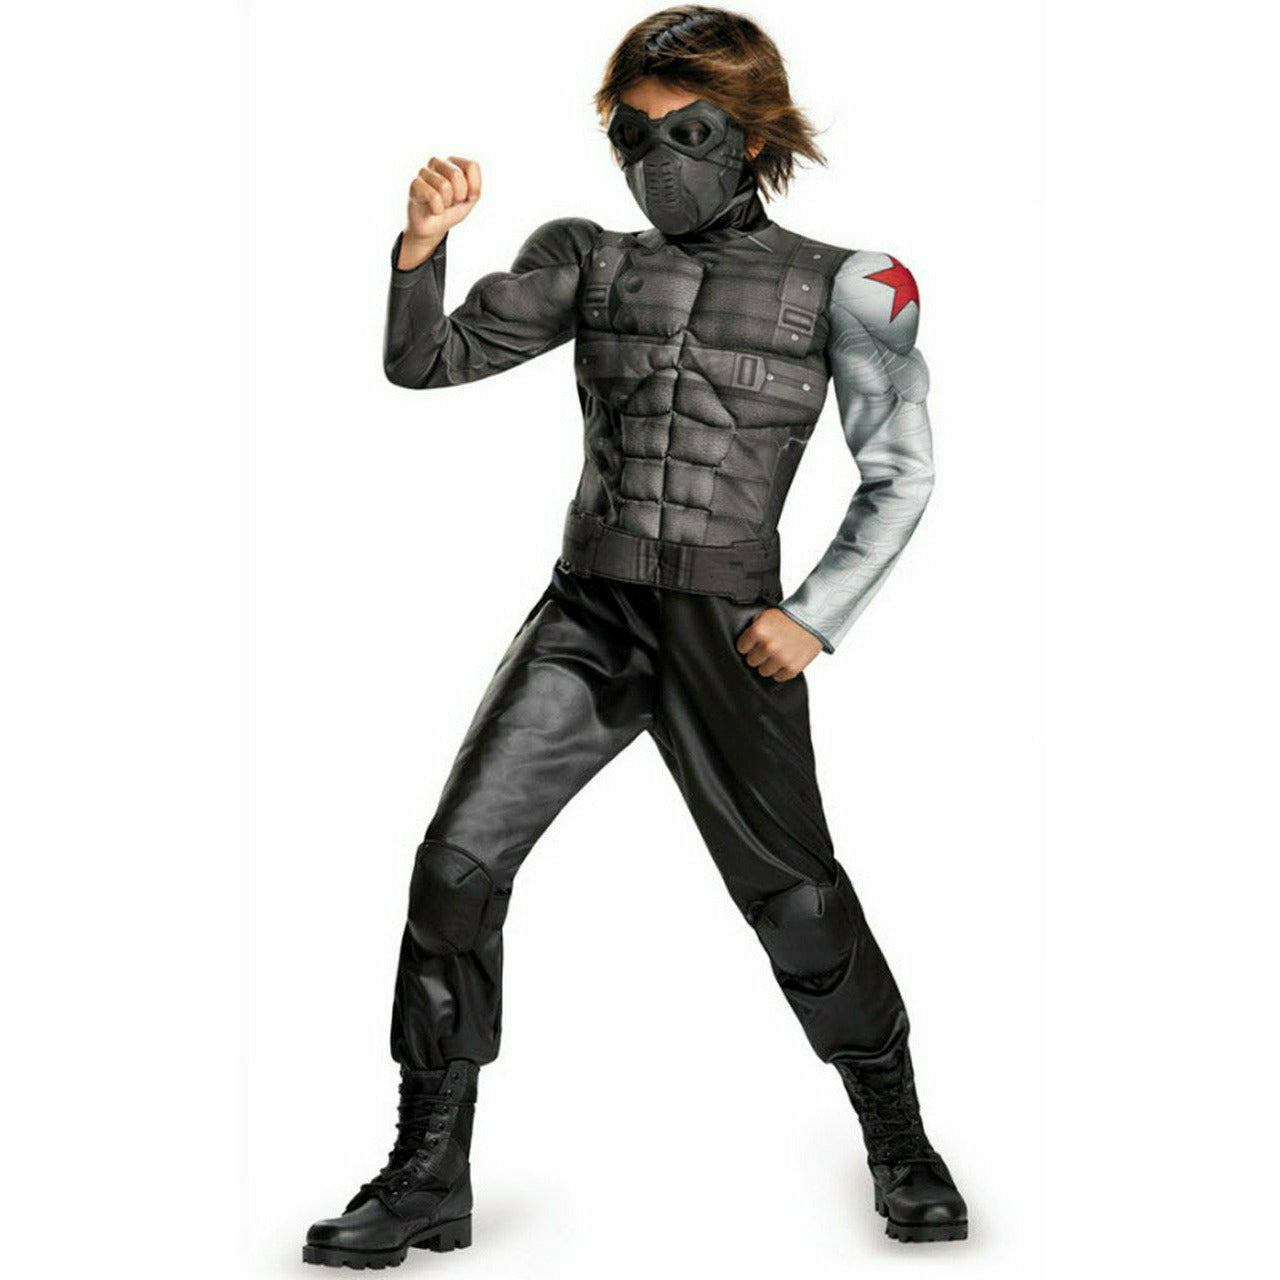 COSTUMES USA COSTUMES Small (4-6) Boys Winter Soldier Muscle Costume